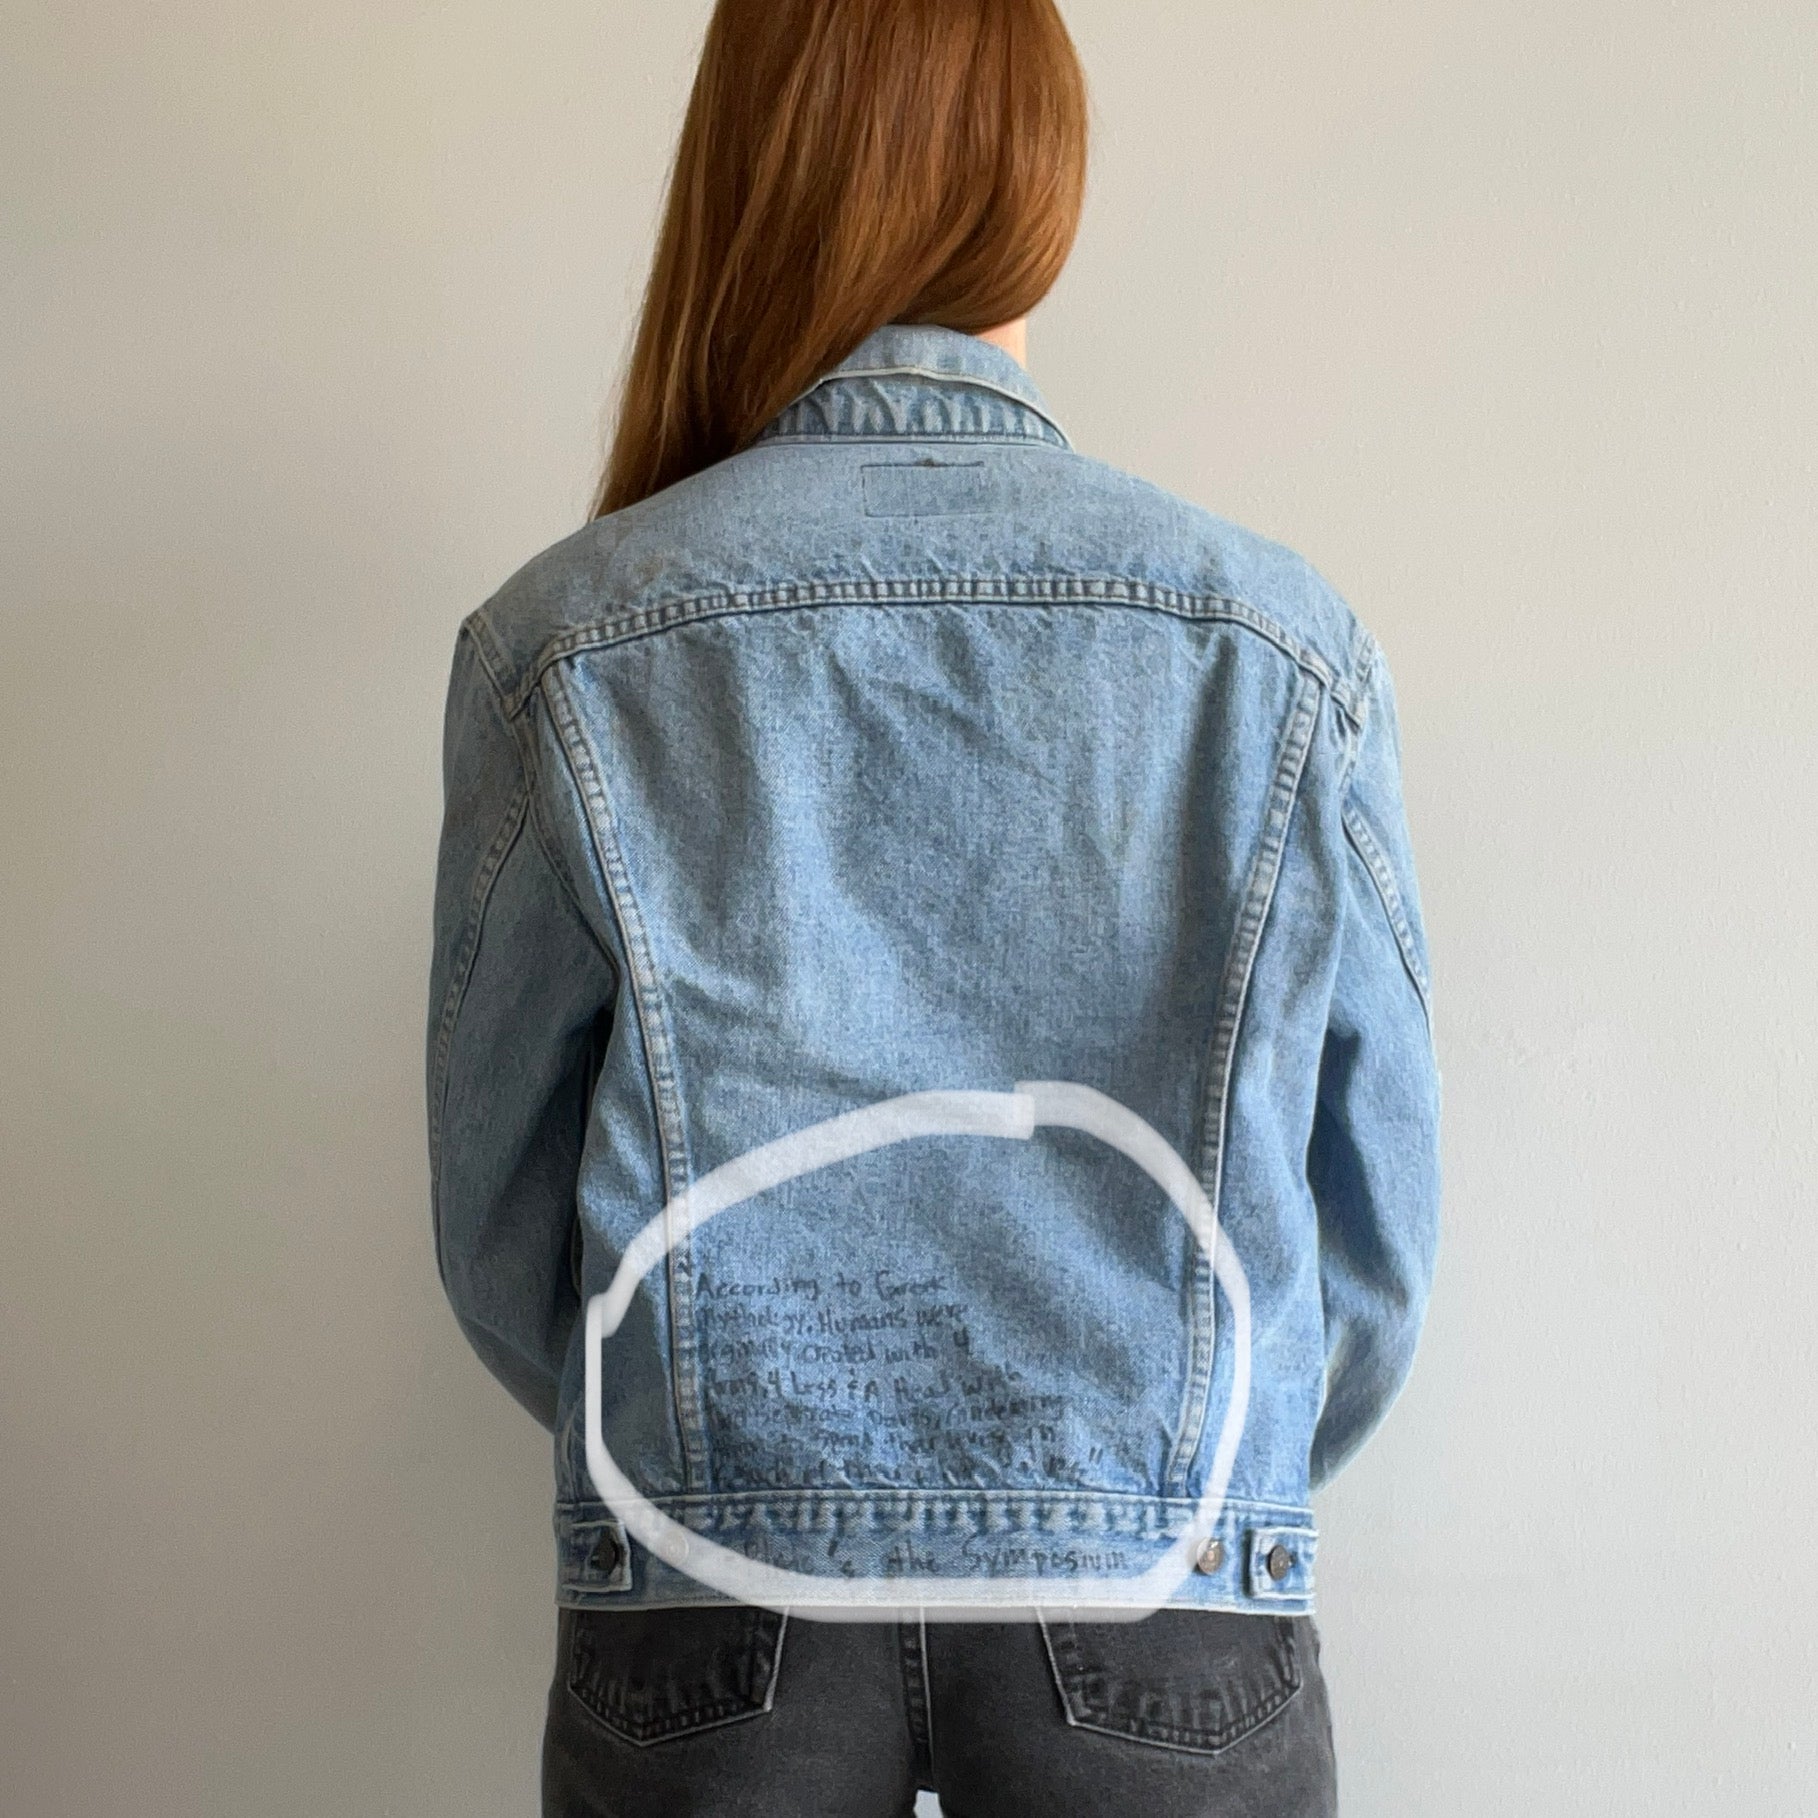 1980s USA Made Levi's Trucker Jacket with a Philosophical Quote by Socrates in Sharpie !!!